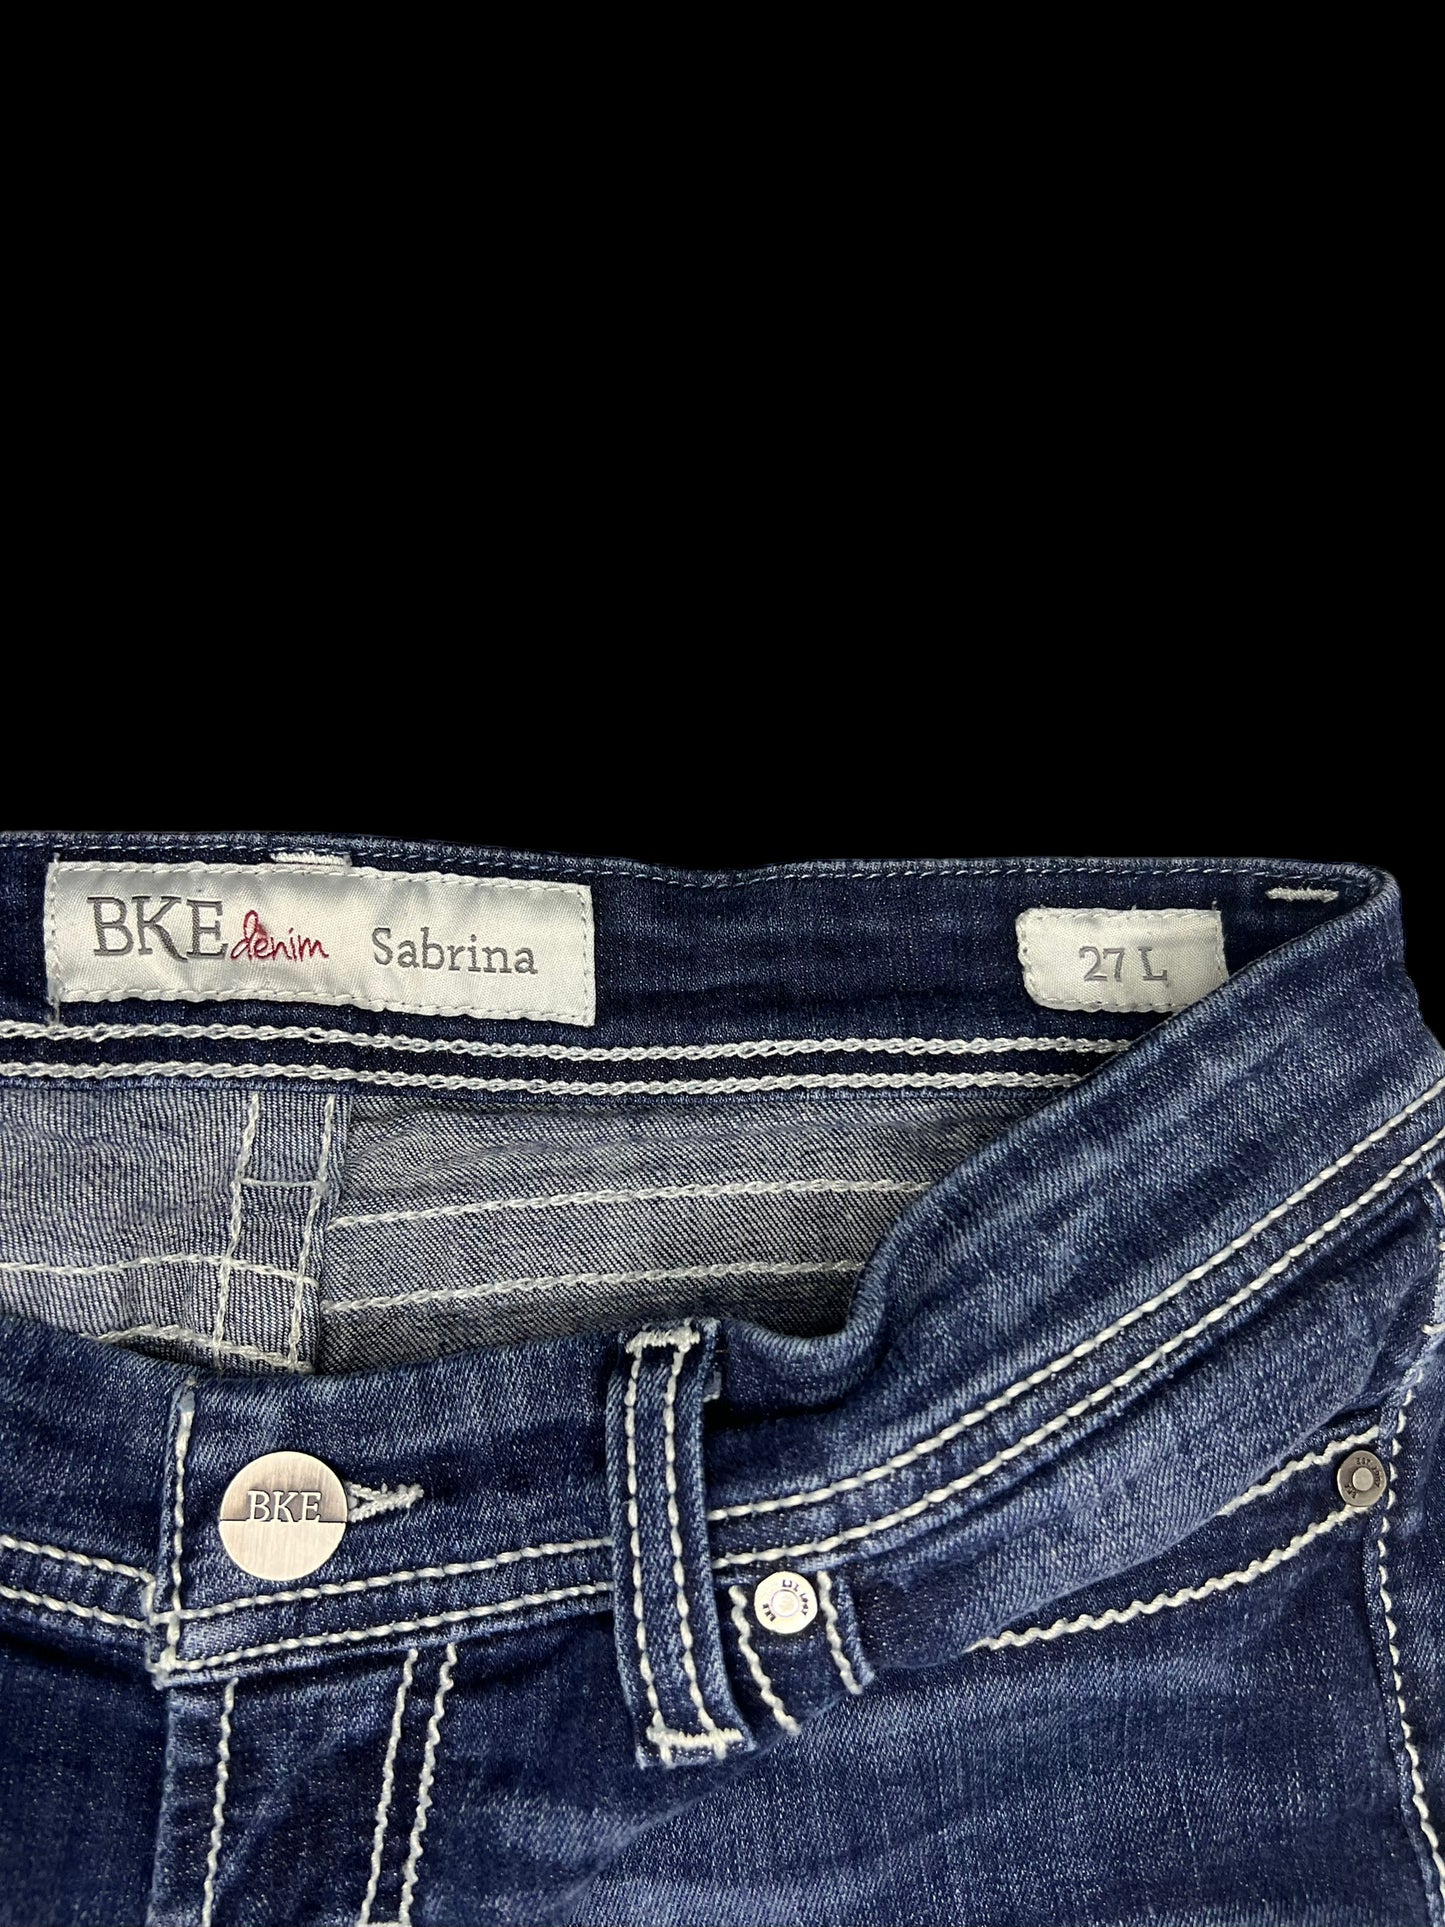 Low-rise jeans